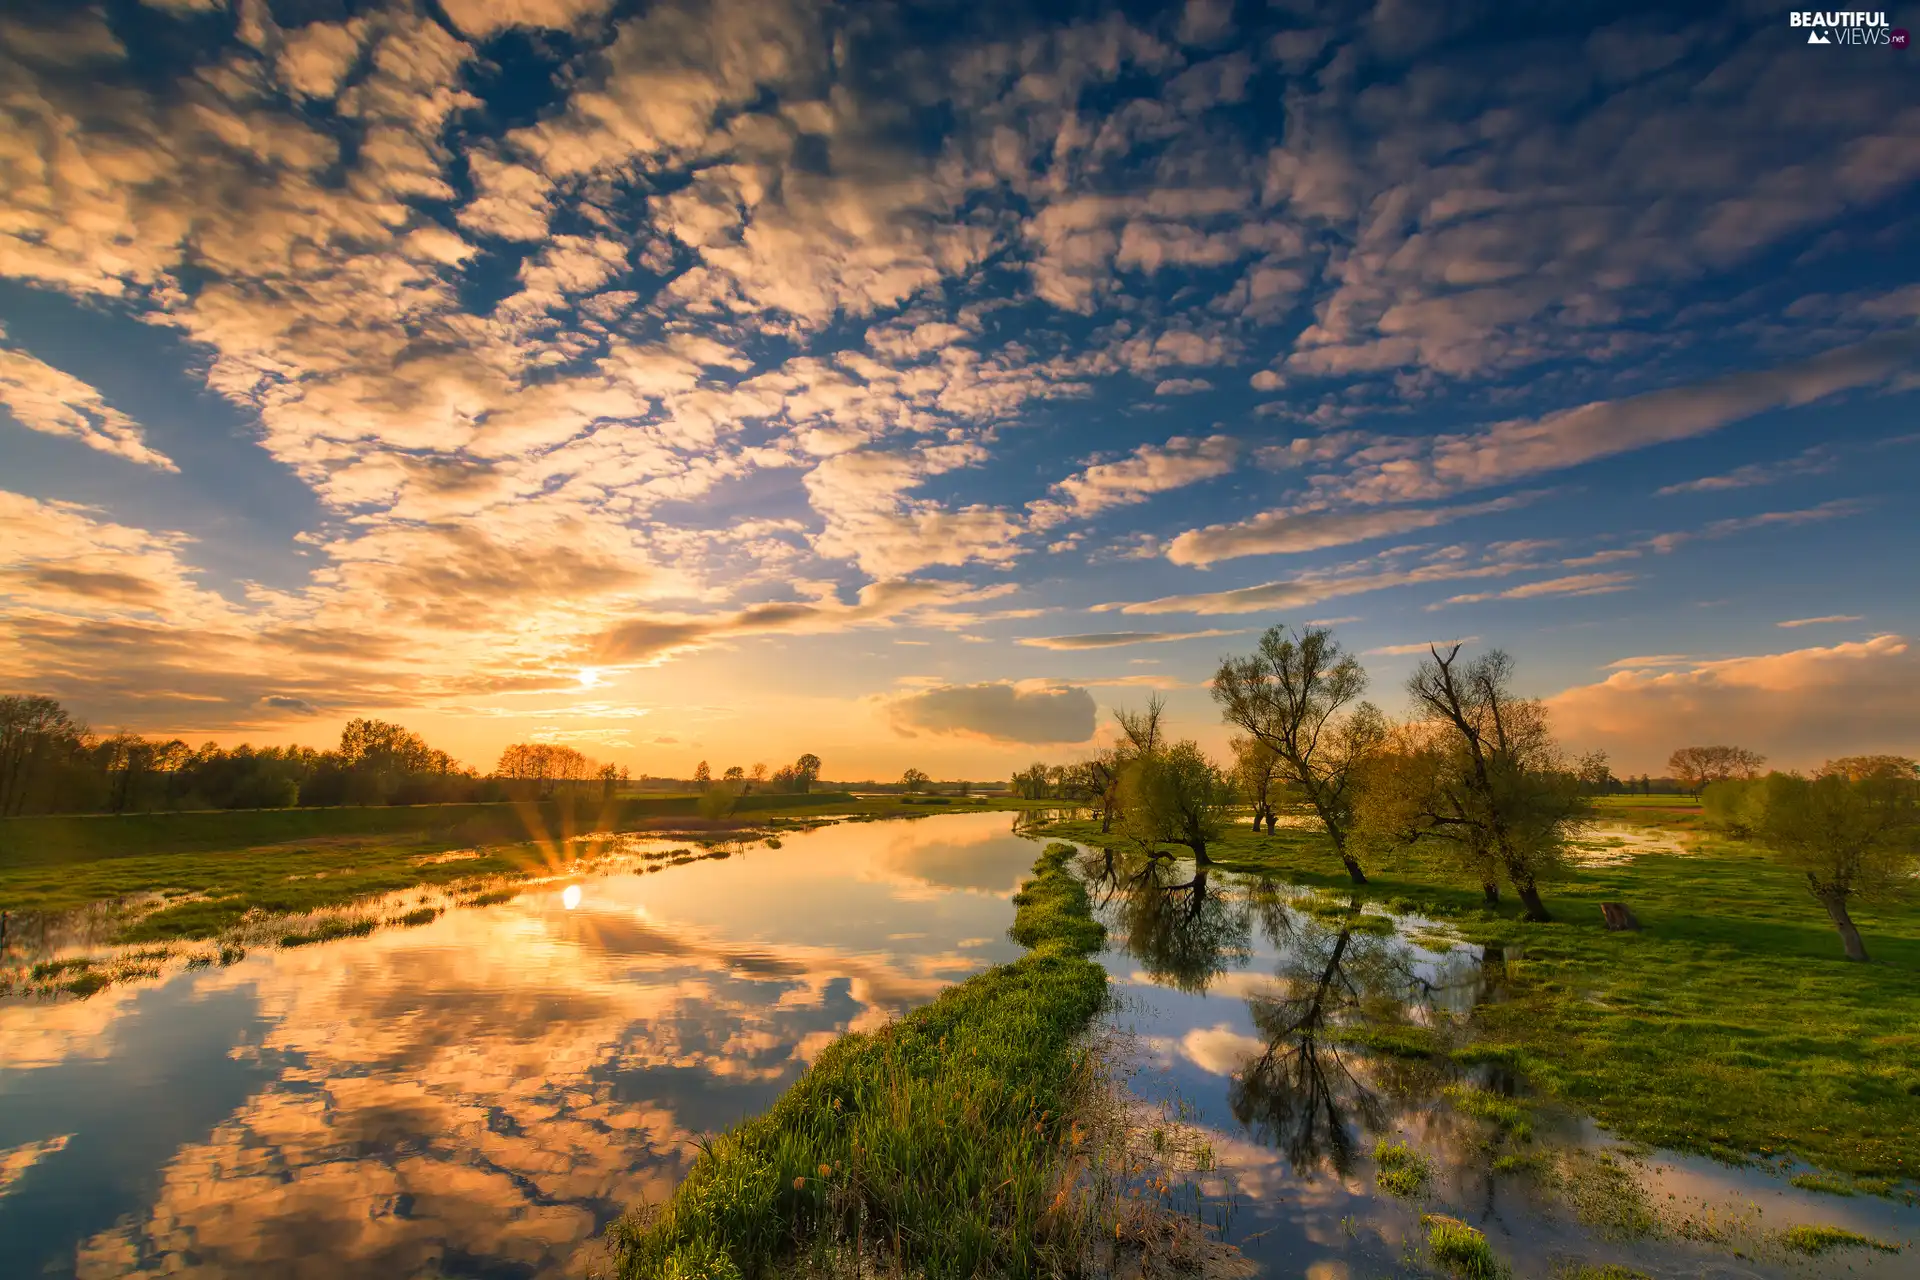 River, Great Sunsets, viewes, clouds, trees, medows